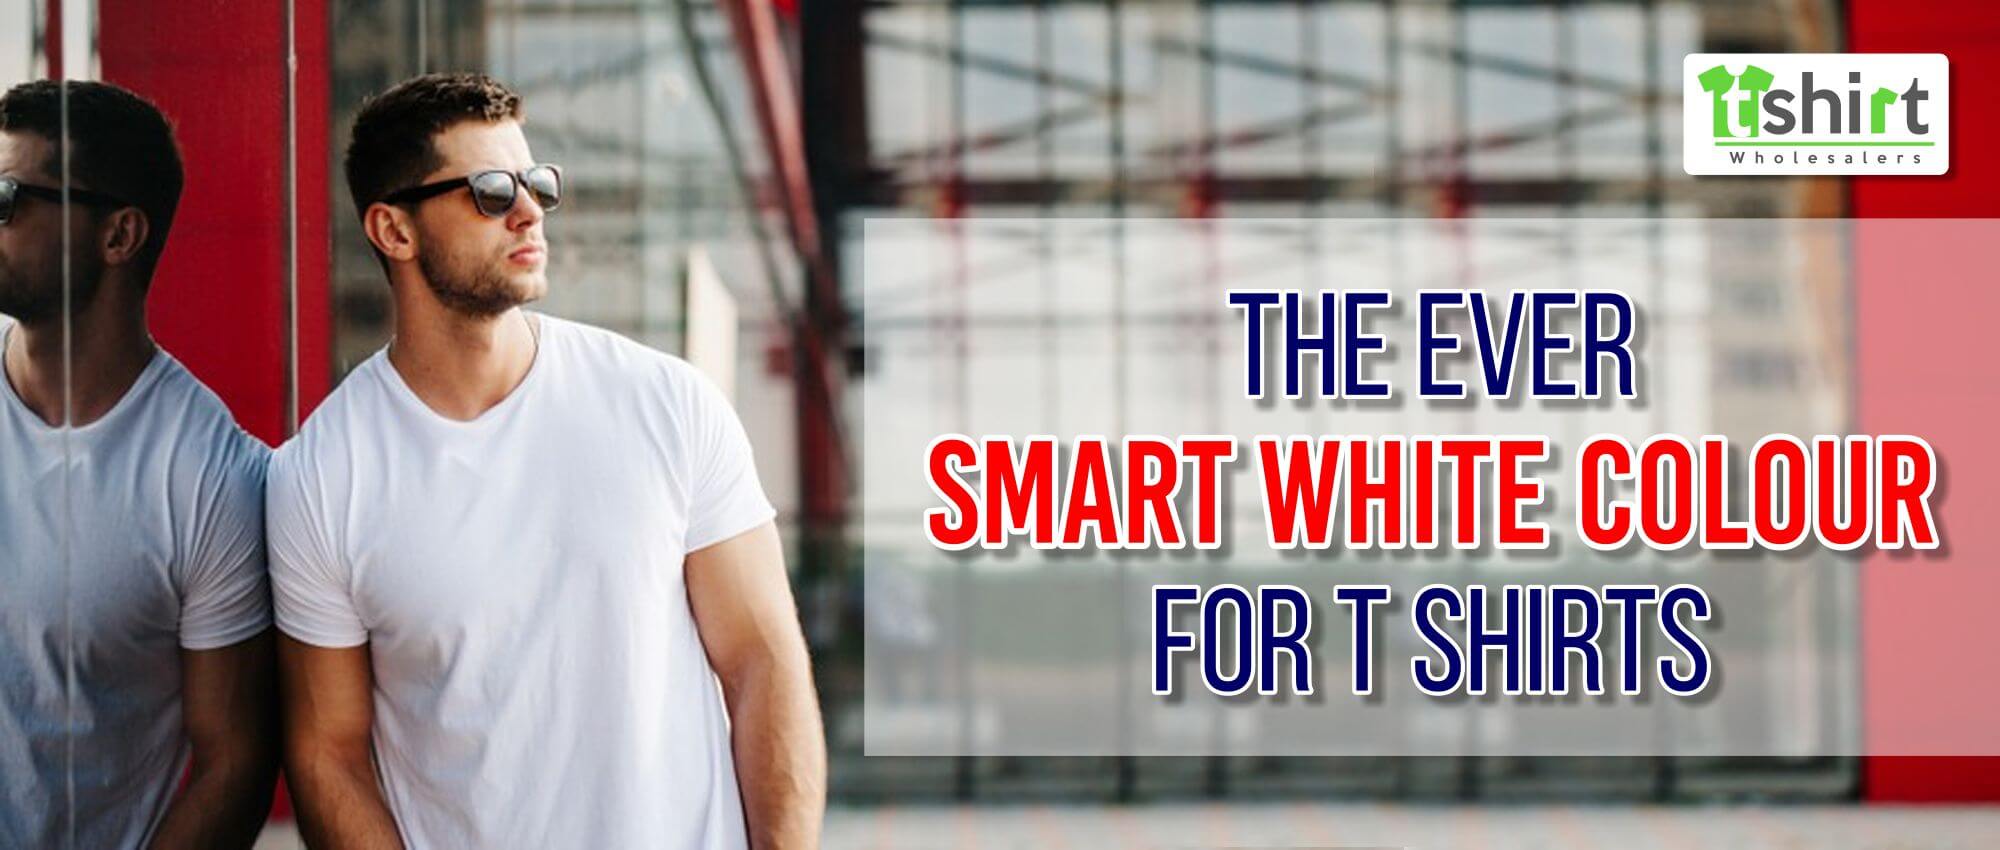 THE EVER SMART WHITE COLOUR FOR T SHIRTS